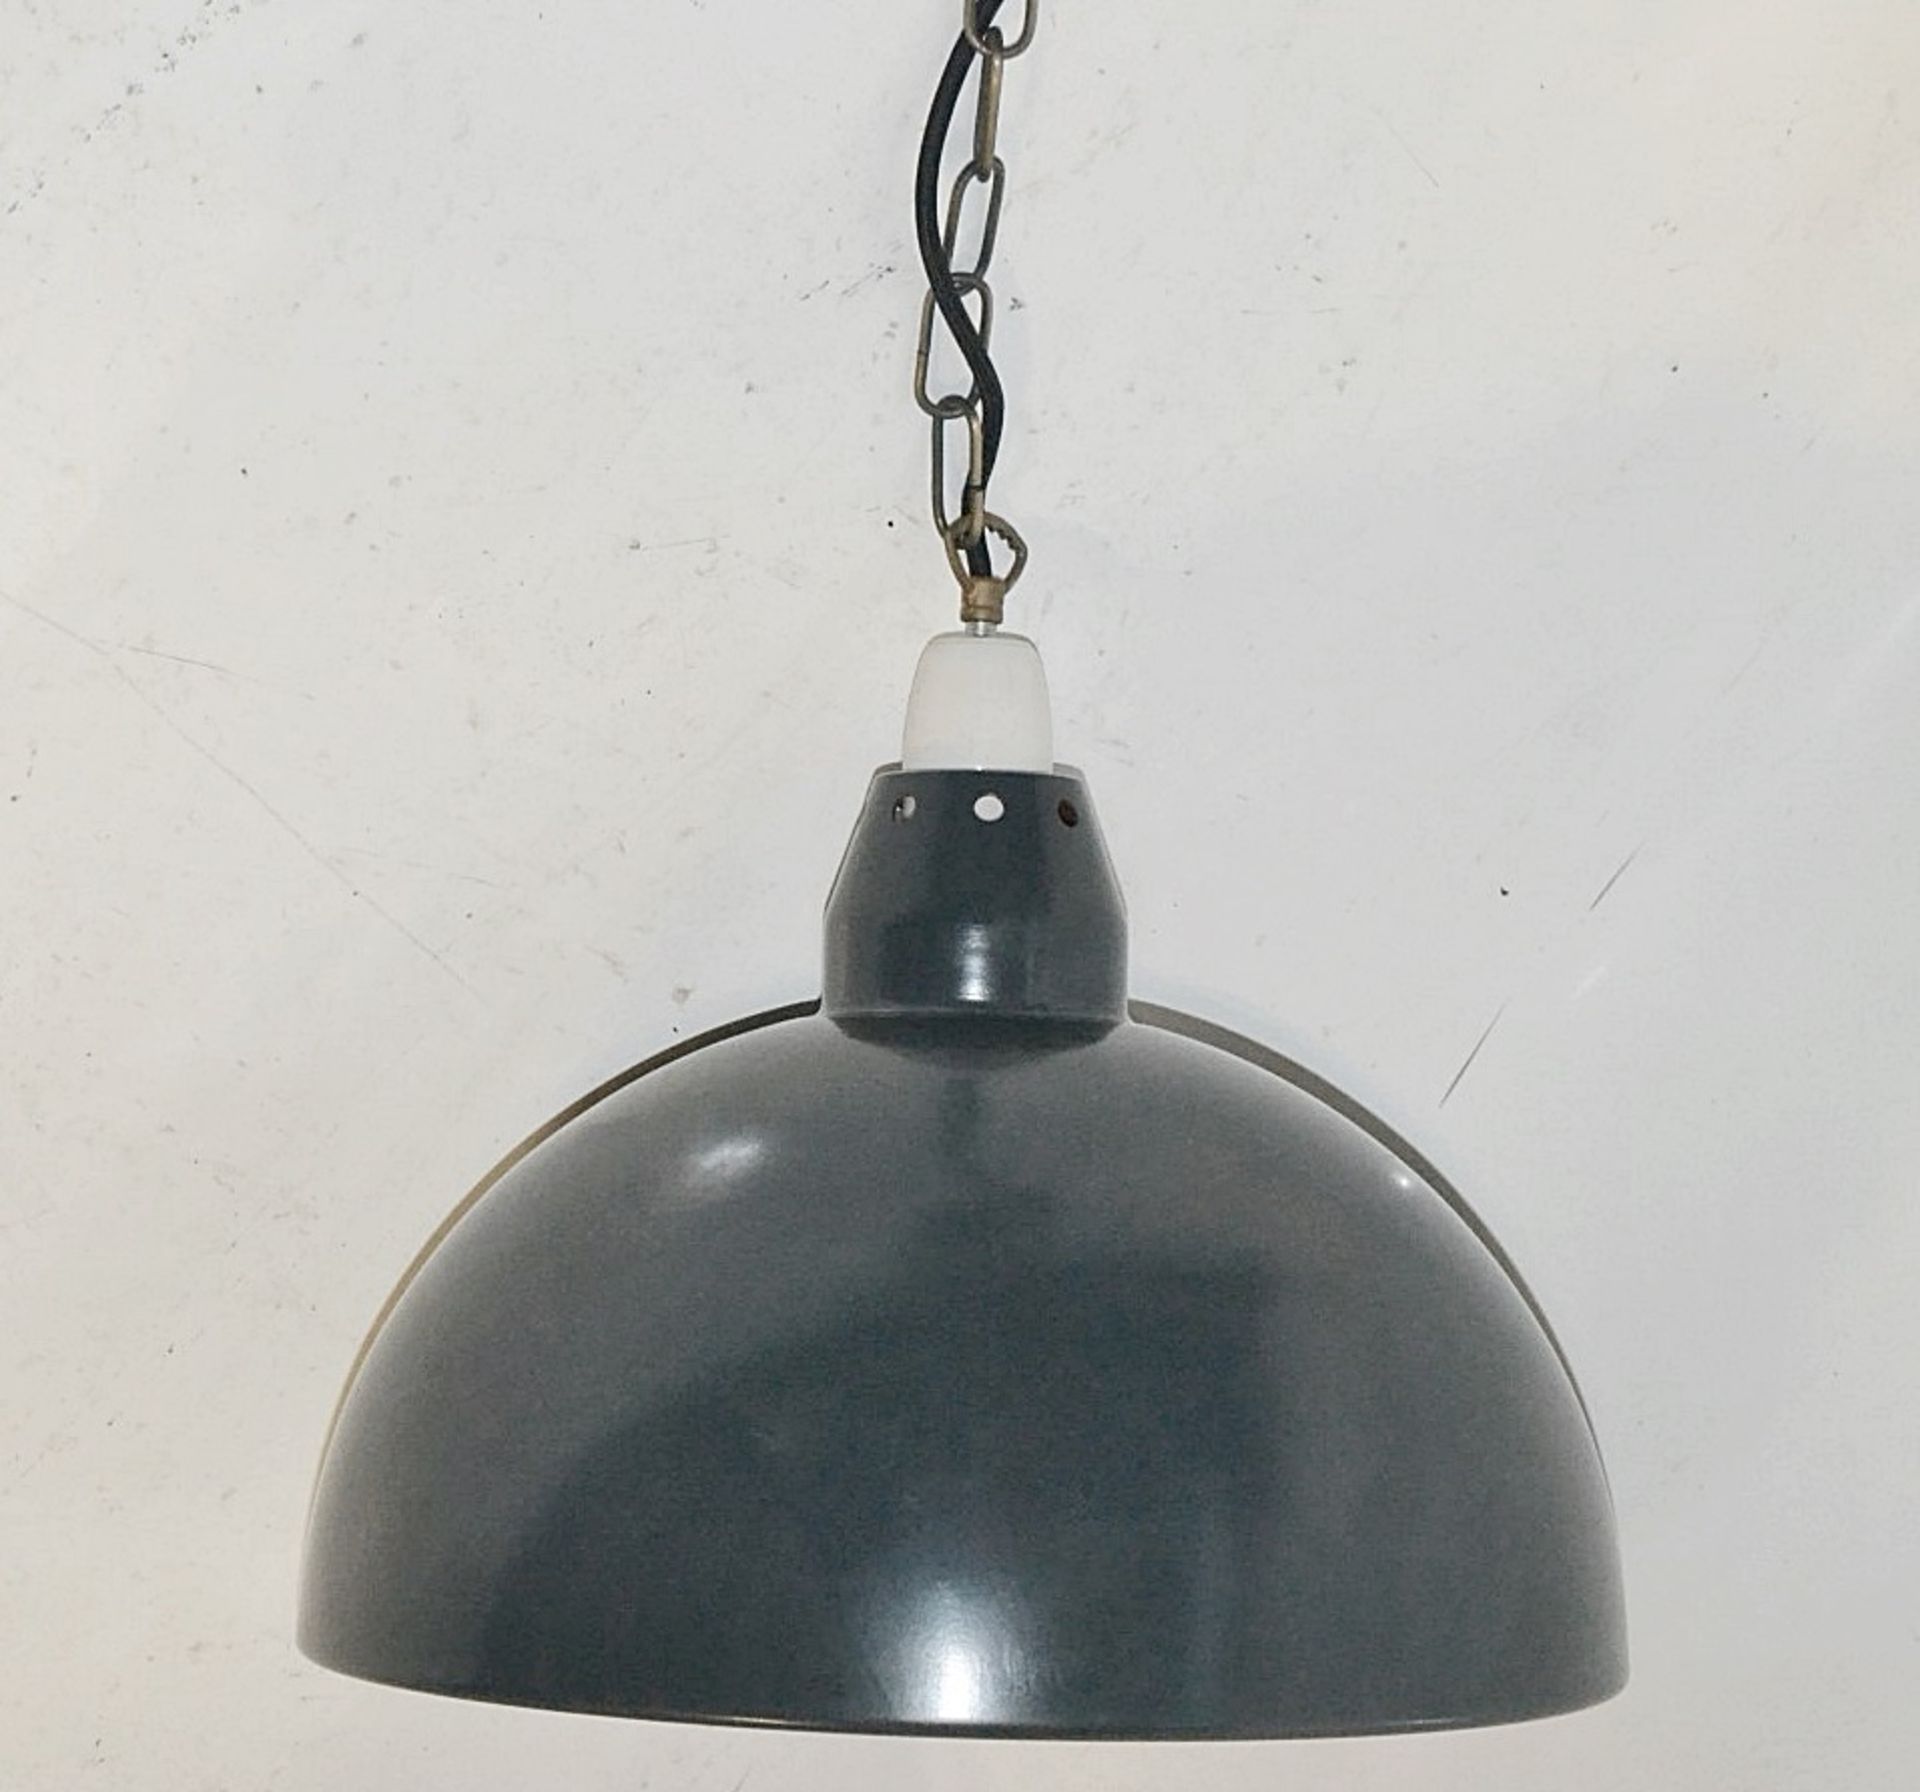 5 x Dome Pendant Ceiling Light Fittings With Chain And Black Fabric Flex - CL353 - Image 6 of 6